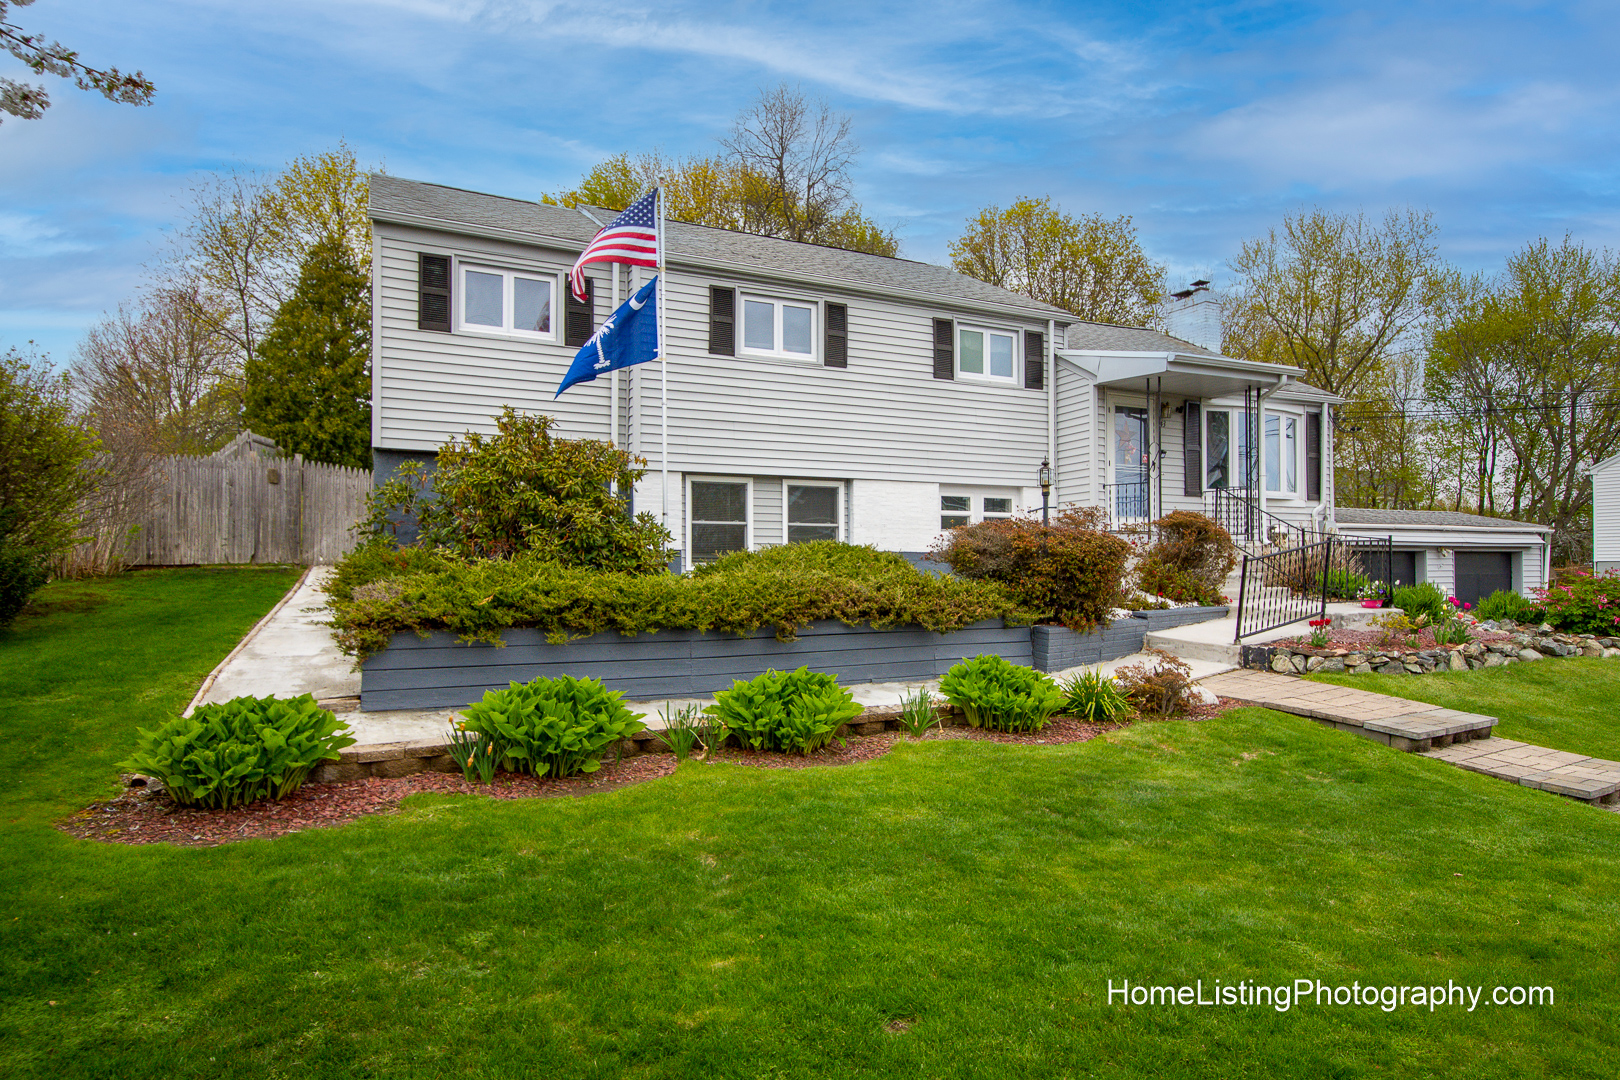 Thomas Adach - Woburn MA professional real estate photographer - 508-655-2225 - Home Listing Photography